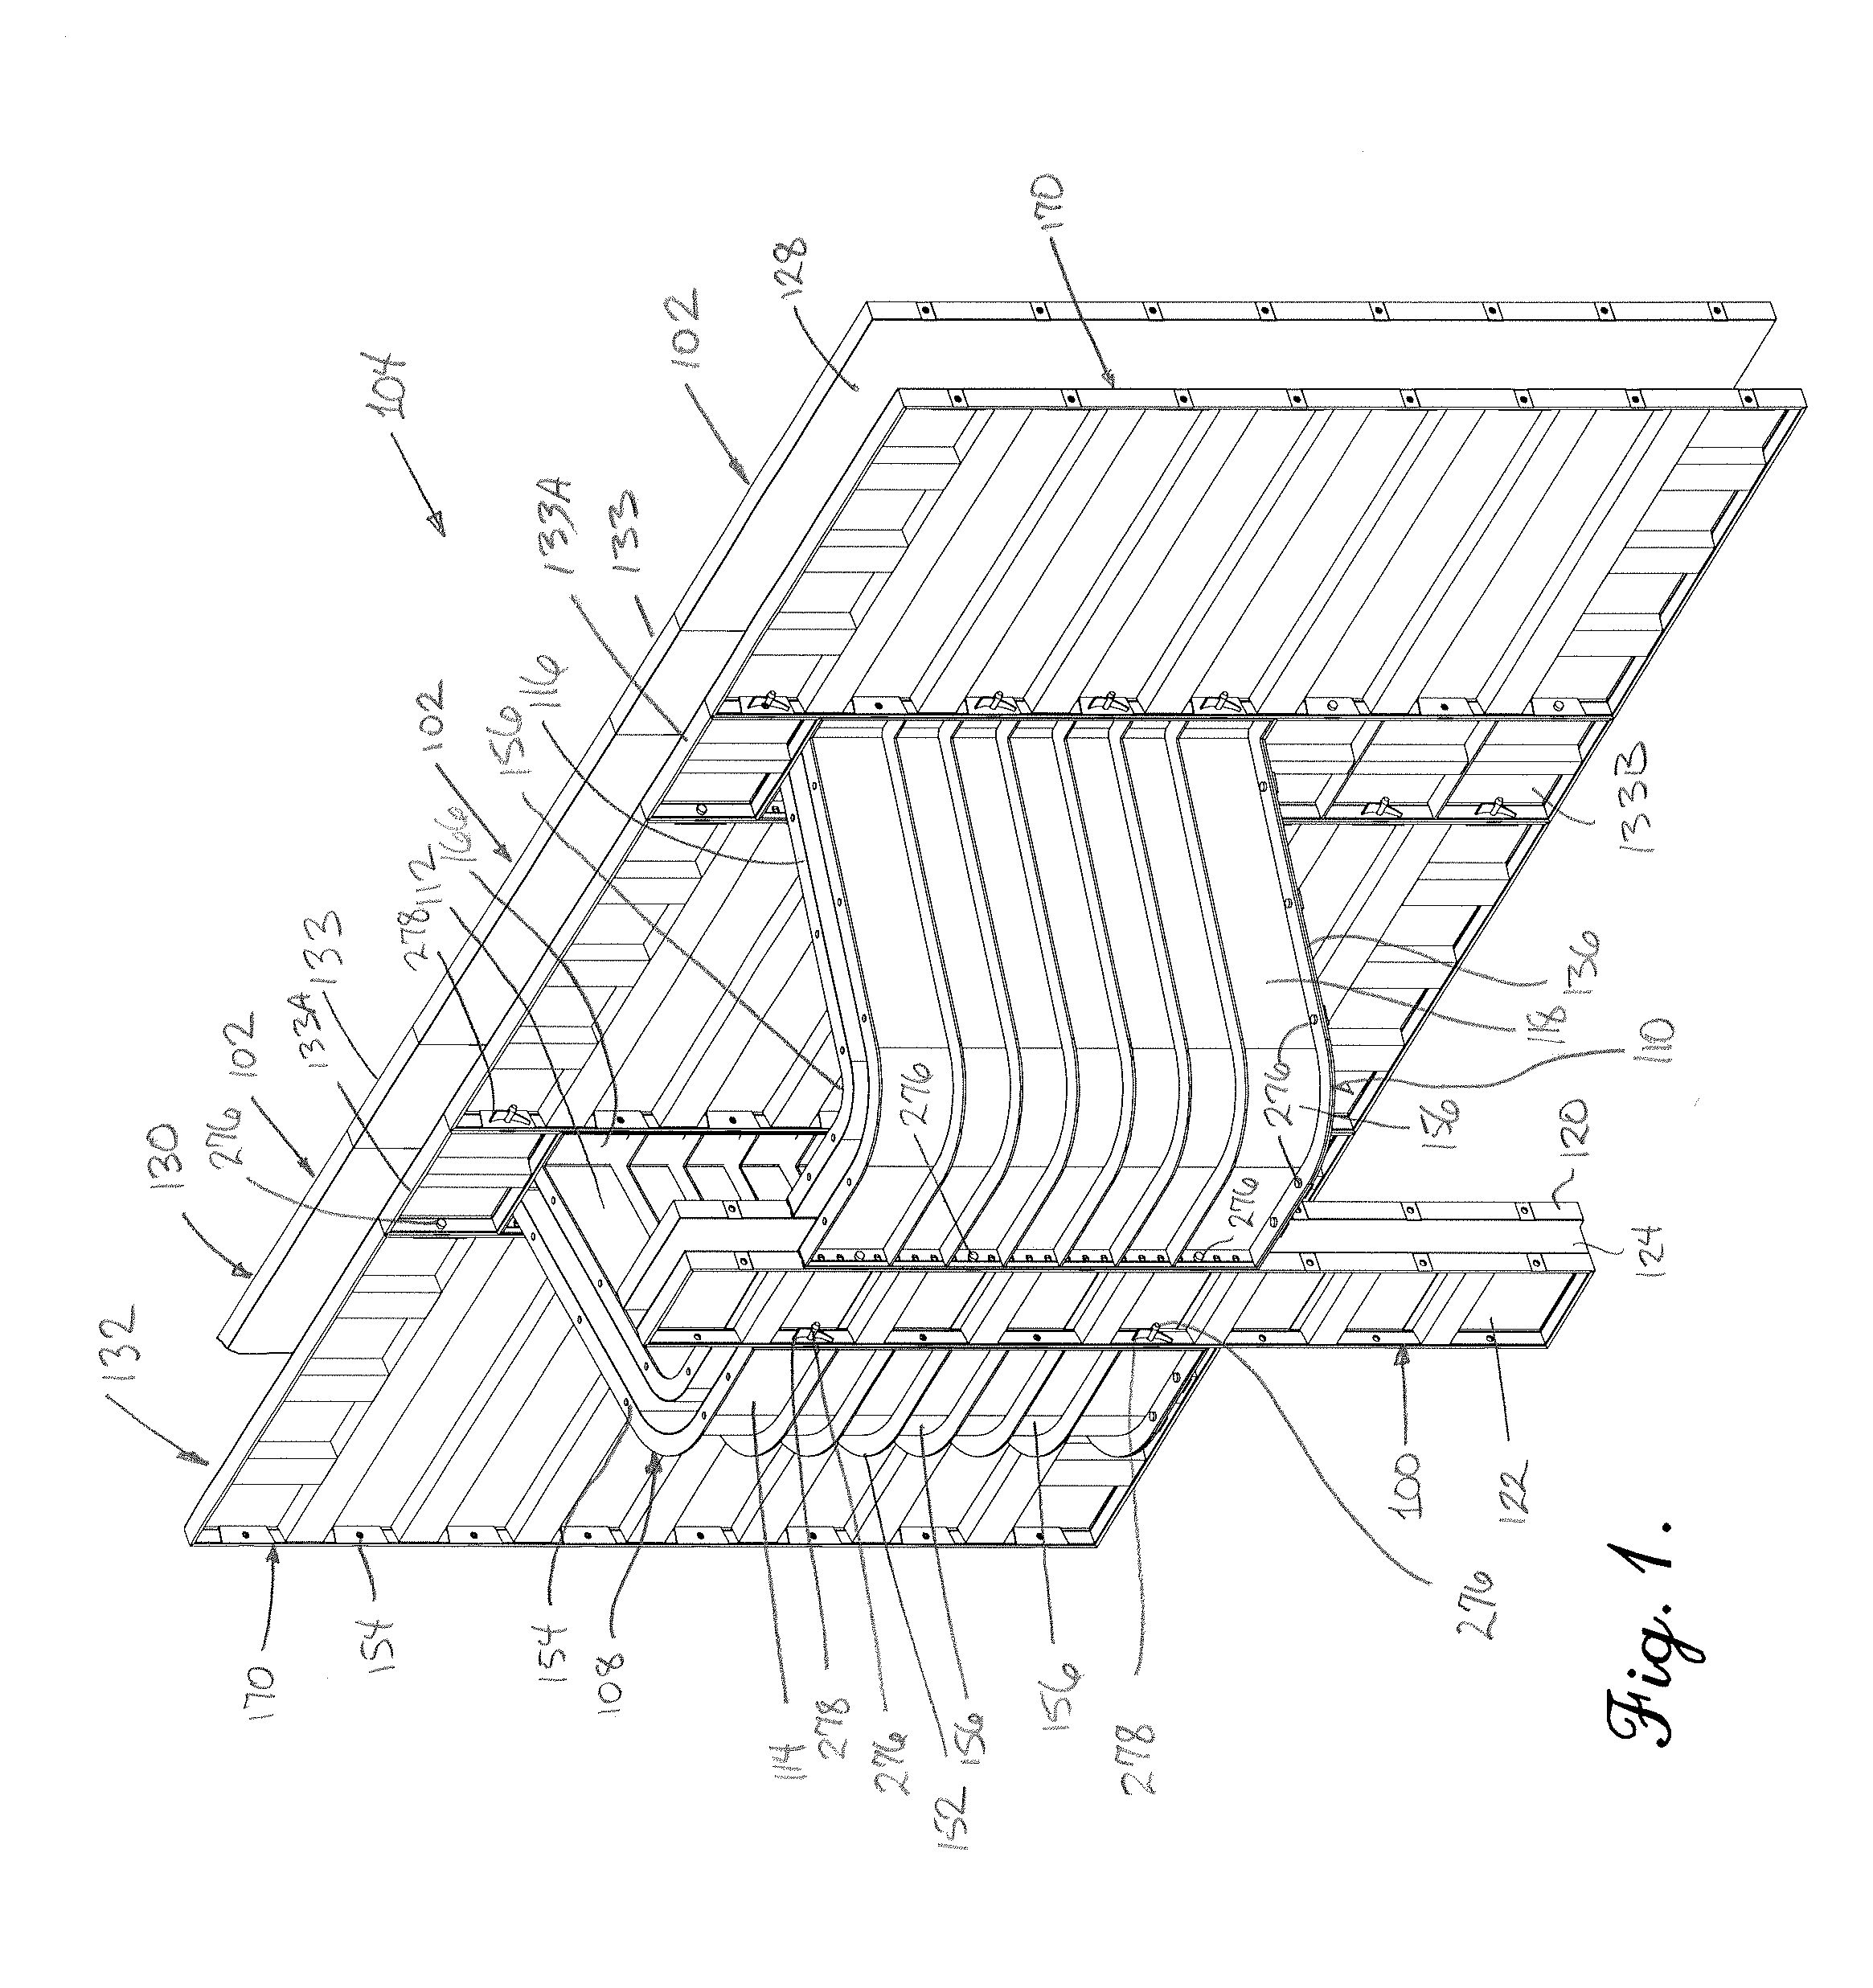 Method and Apparatus for Forming Cast-In-Place Concrete Window Wells